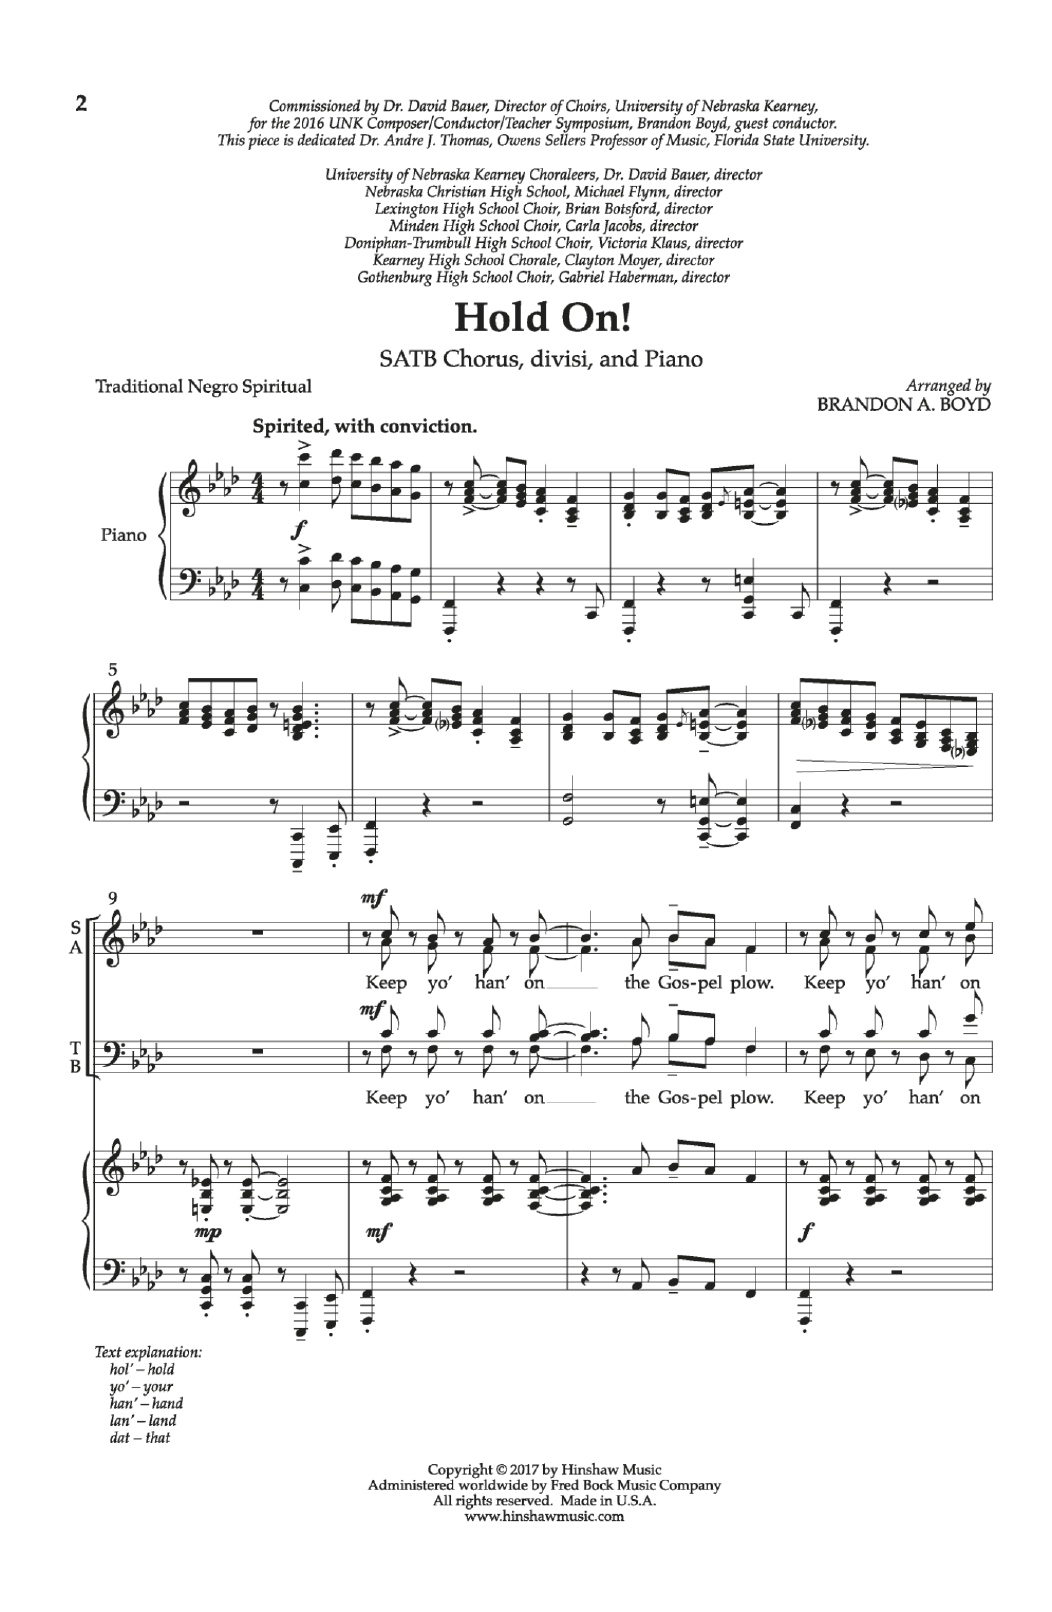 Download Brandon A. Boyd Hold On! Sheet Music